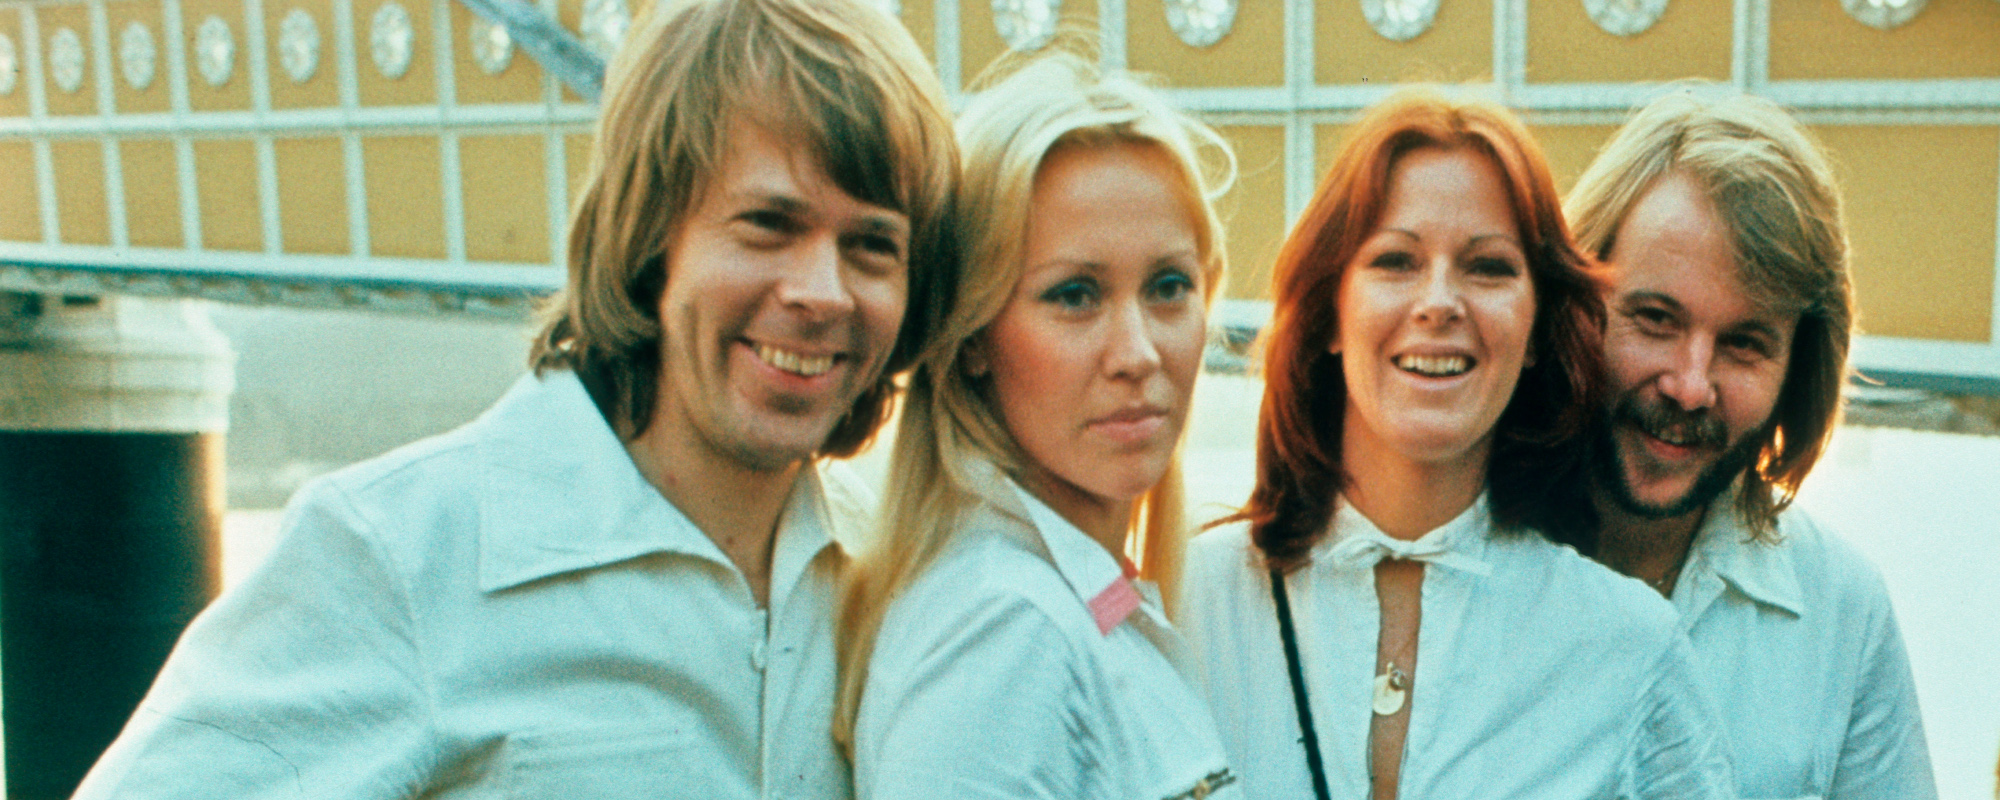 The Revolutionary Meaning Behind ABBA’s Freedom-Fighting “Fernando”